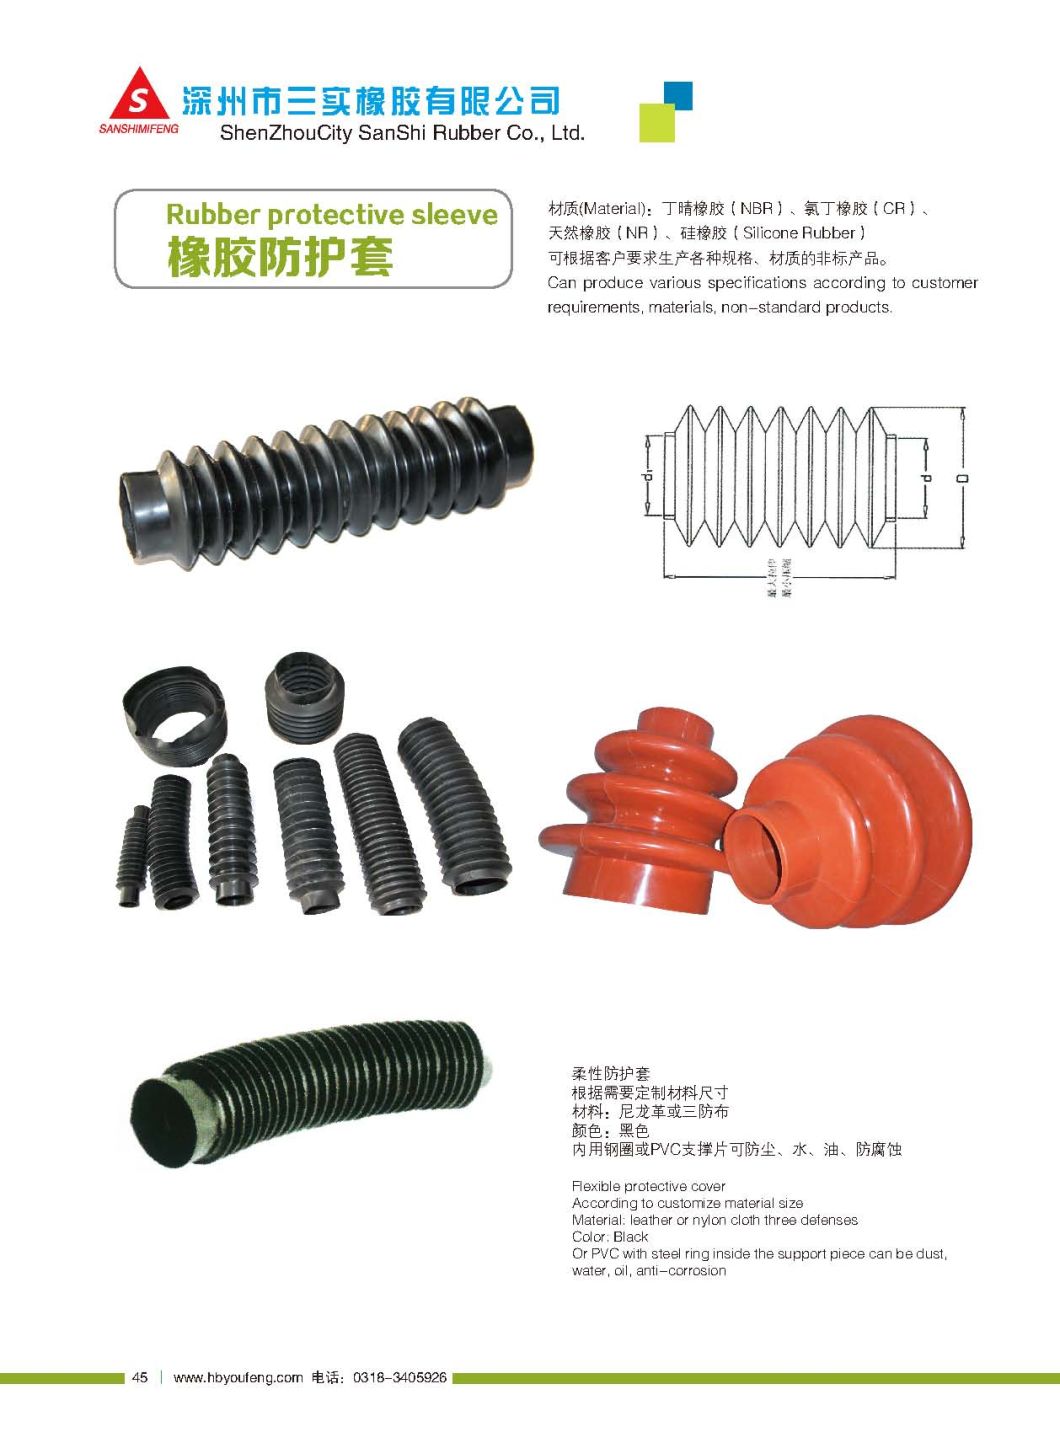 Rubber Rollers for Industrial Uses